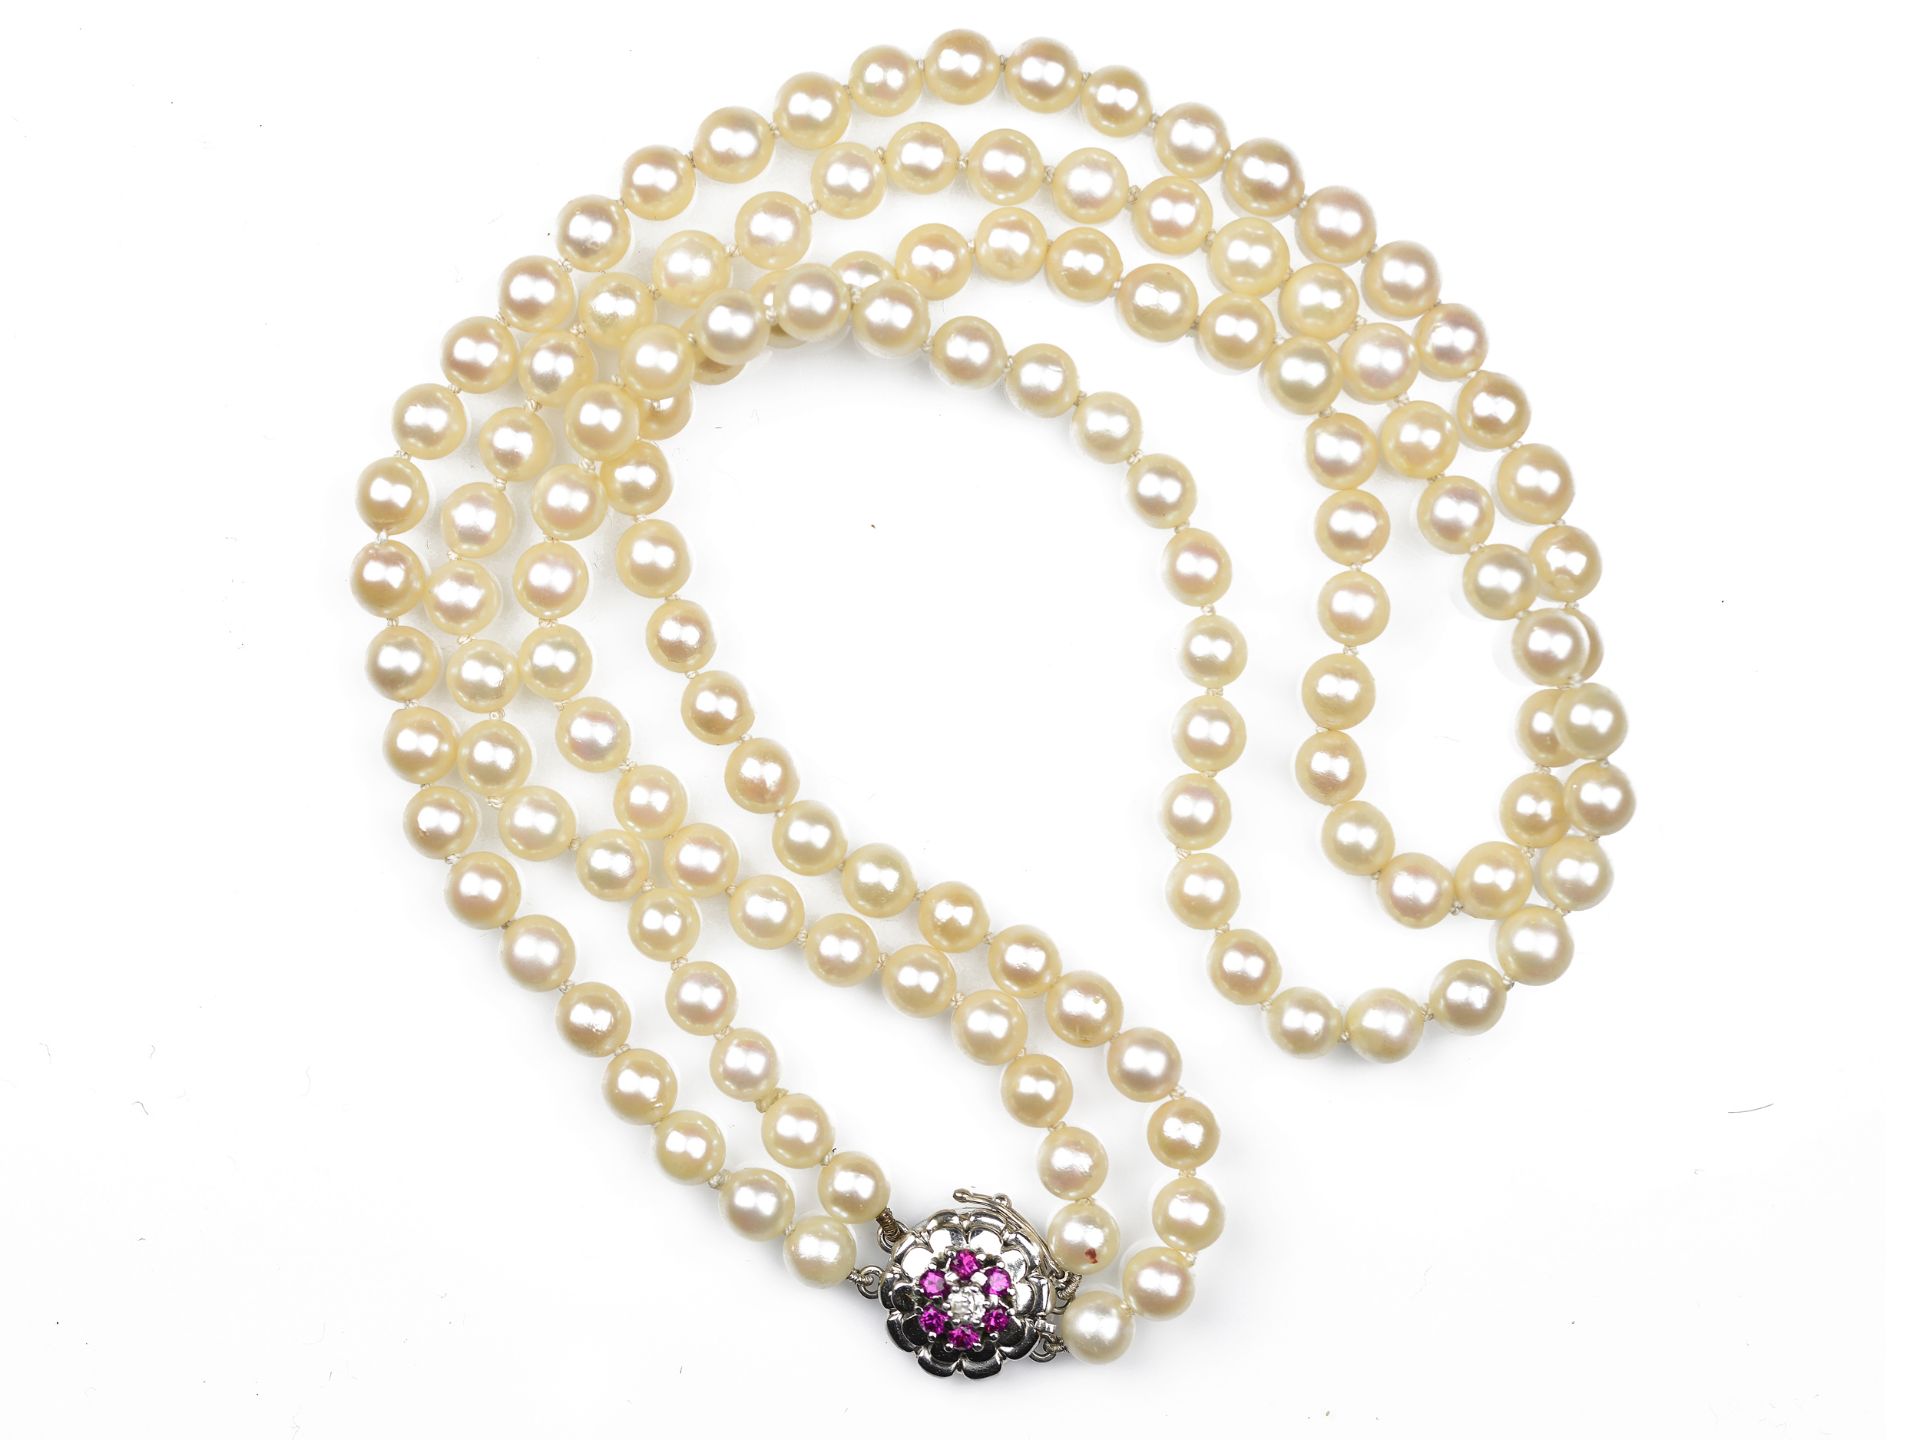 Double-row pearl necklace - Image 2 of 2